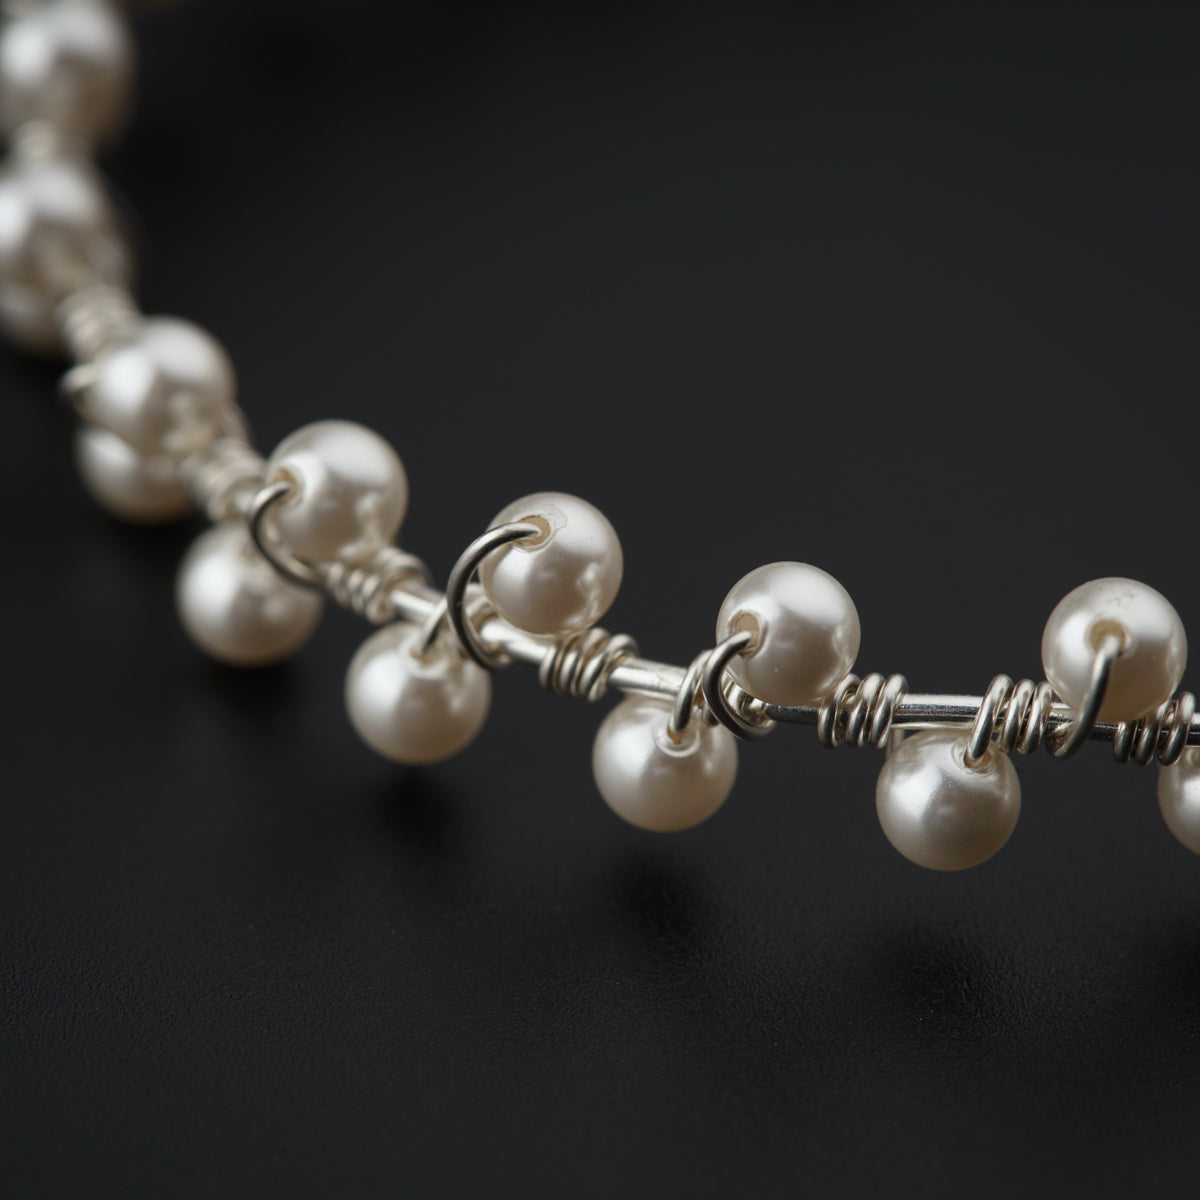 a close up of a necklace made of pearls